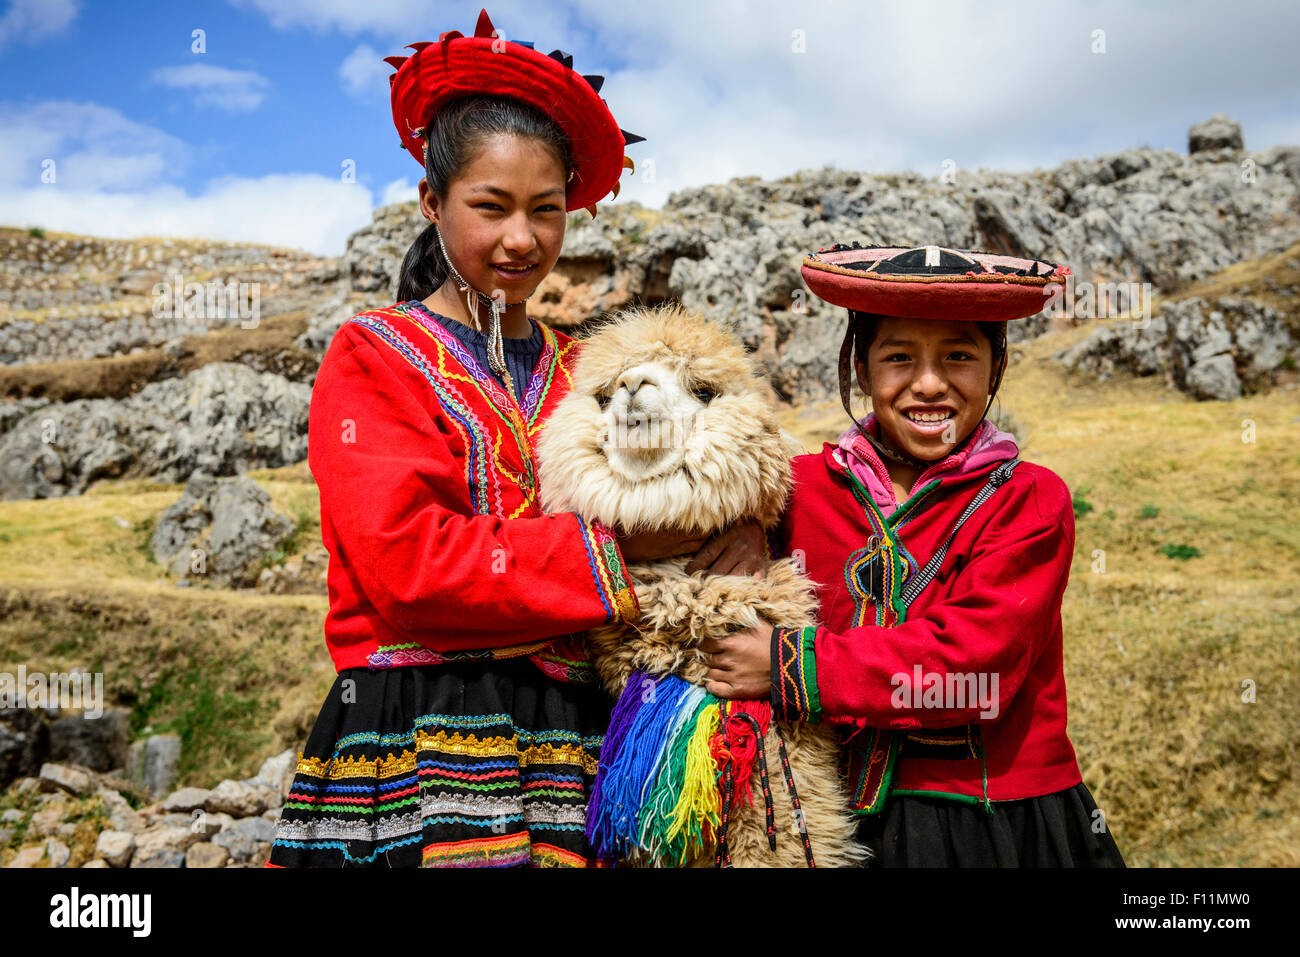 Hispanic sisters smiling with llama in rural landscape Stock Photo